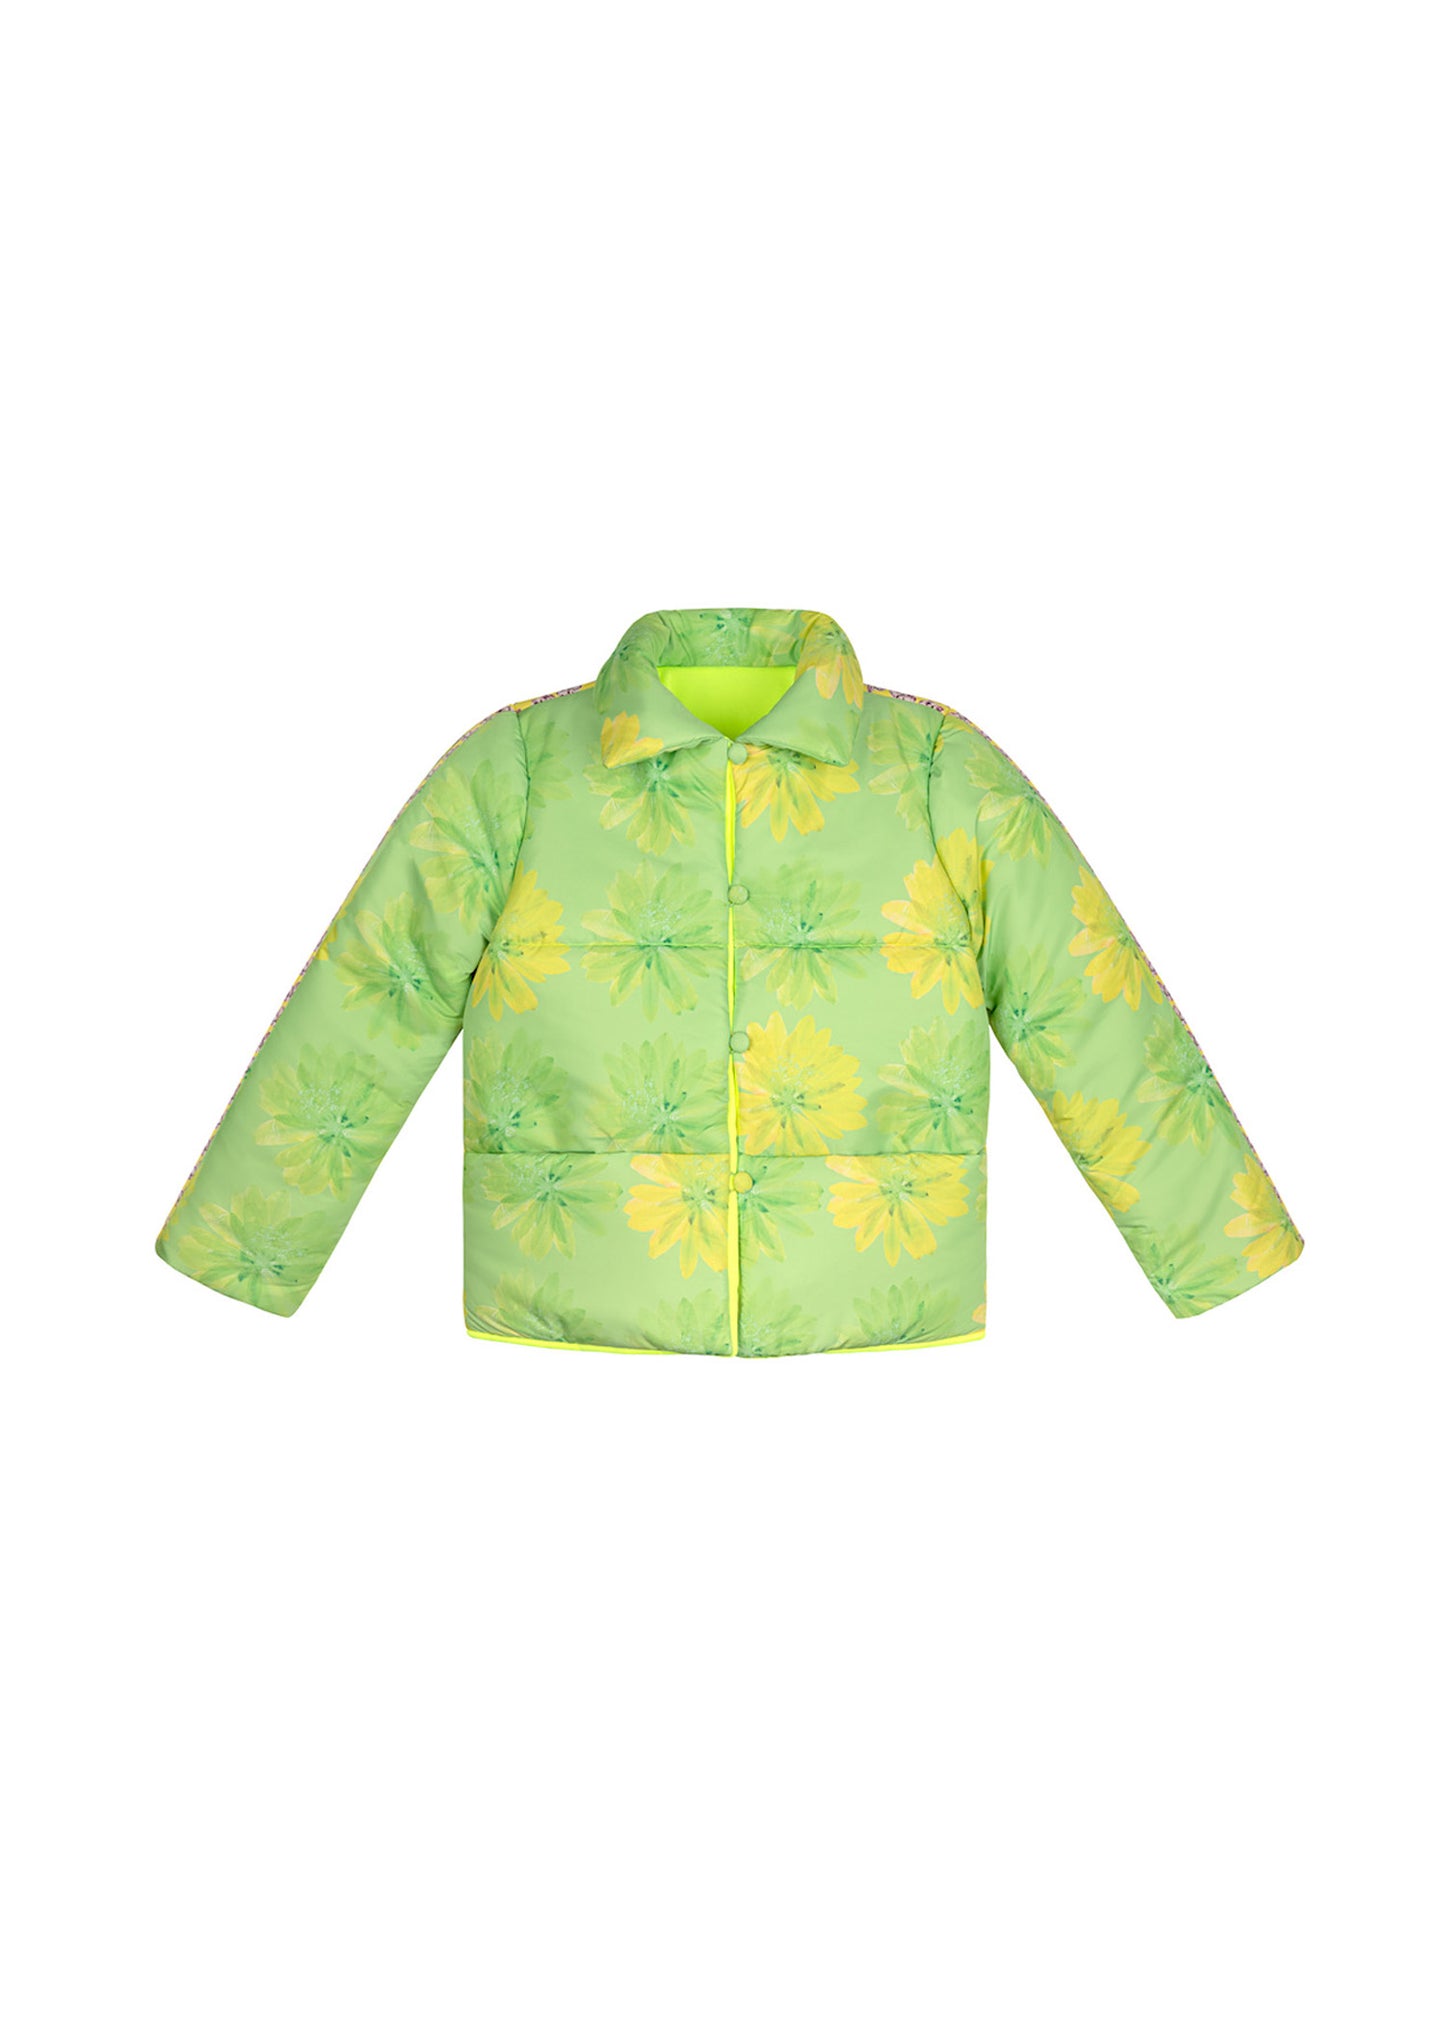 The world's most joyful, coziest puffer in neon orchid and neon lotus recycled polyester. The flowers for these prints were grown and pressed by designer Olivia Cheng's mother.